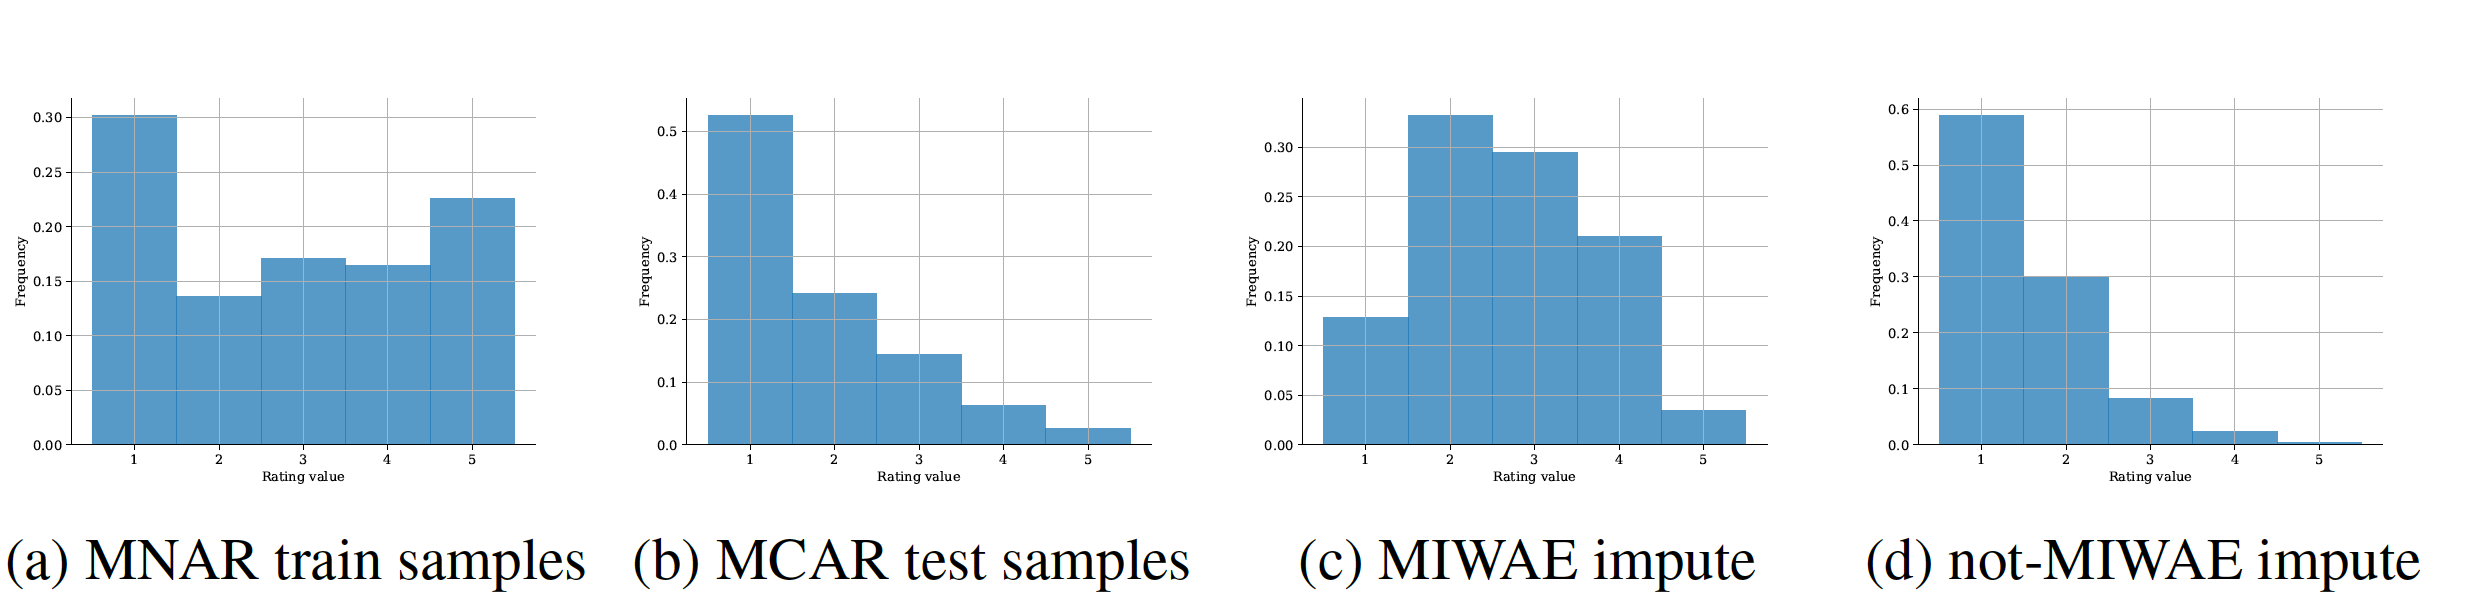 Using not-MIWAE to tackle selection bias in a recommender system. Yahoo! Histograms over rating values from (a) the MNAR training set and (b) the MCAR test set. (c) and (d) show histograms over imputations of missing values in the test set, when encoding the corresponding training set. The not-MIWAE imputations (d) are much more faithful to the shape of the test set (b) than the MIWAE imputations (c).